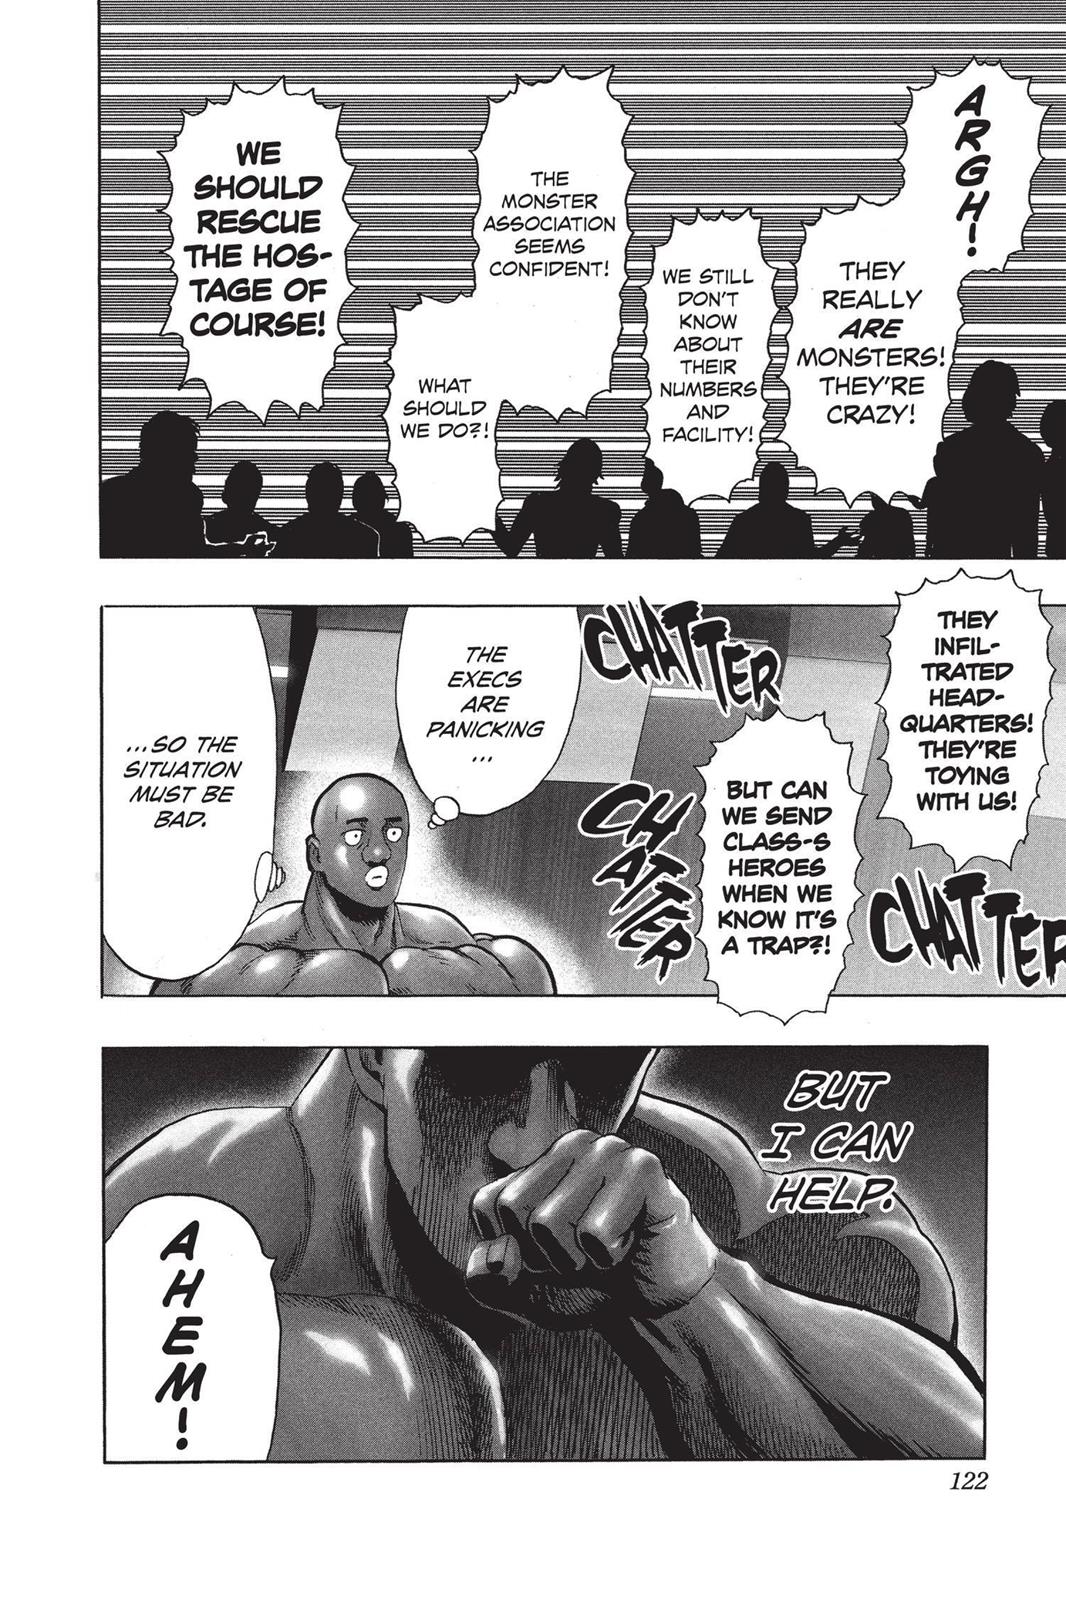 One-Punch Man, Punch 79 image 24